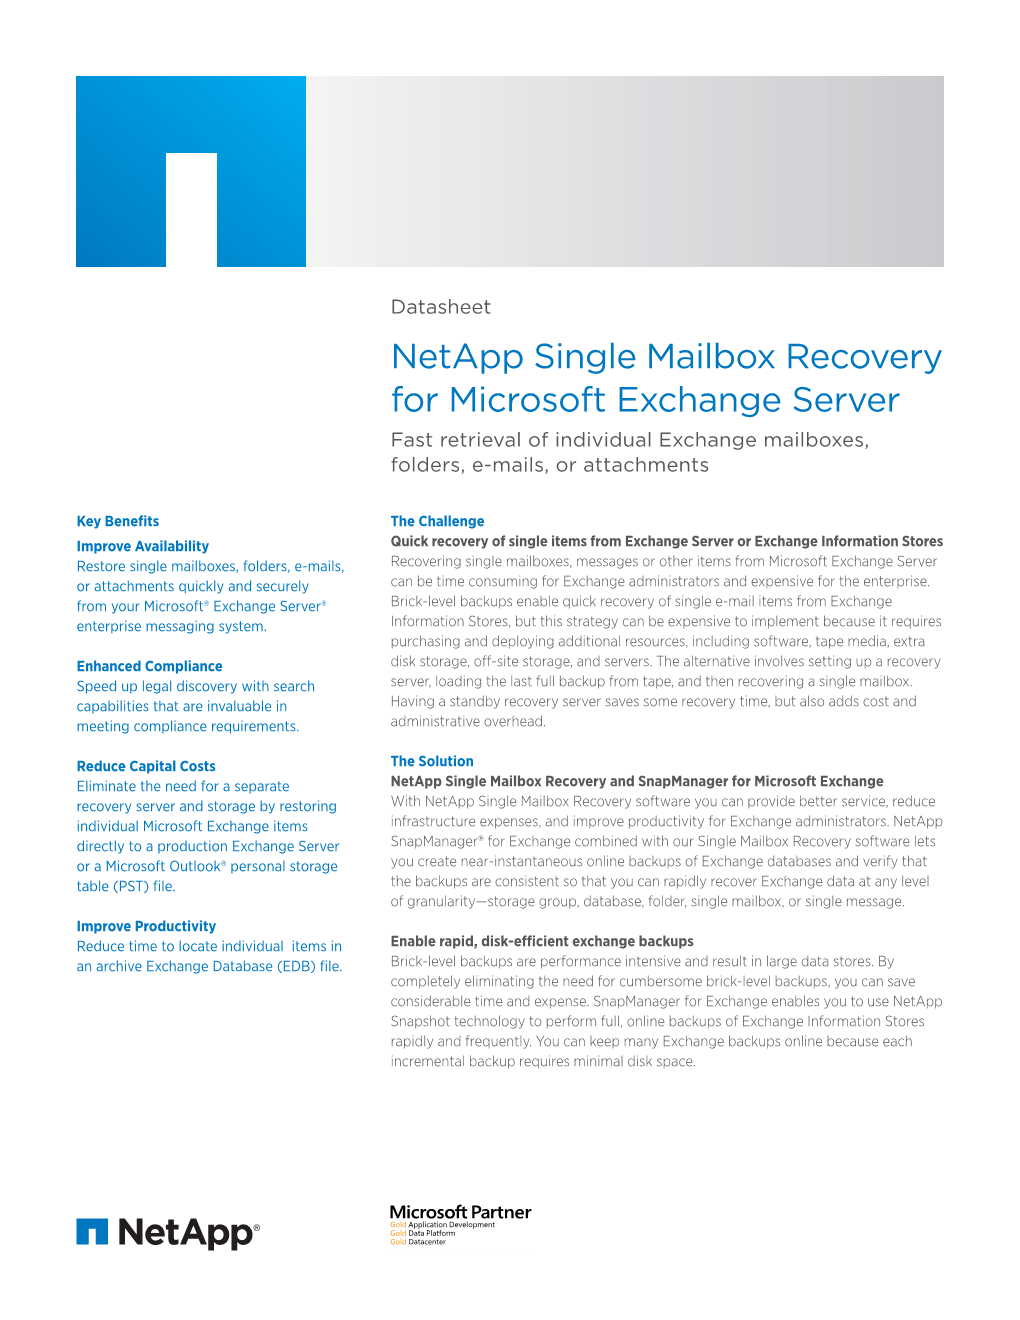 Netapp Single Mailbox Recovery for Microsoft Exchange Server Fast Retrieval of Individual Exchange Mailboxes, Folders, E-Mails, Or Attachments